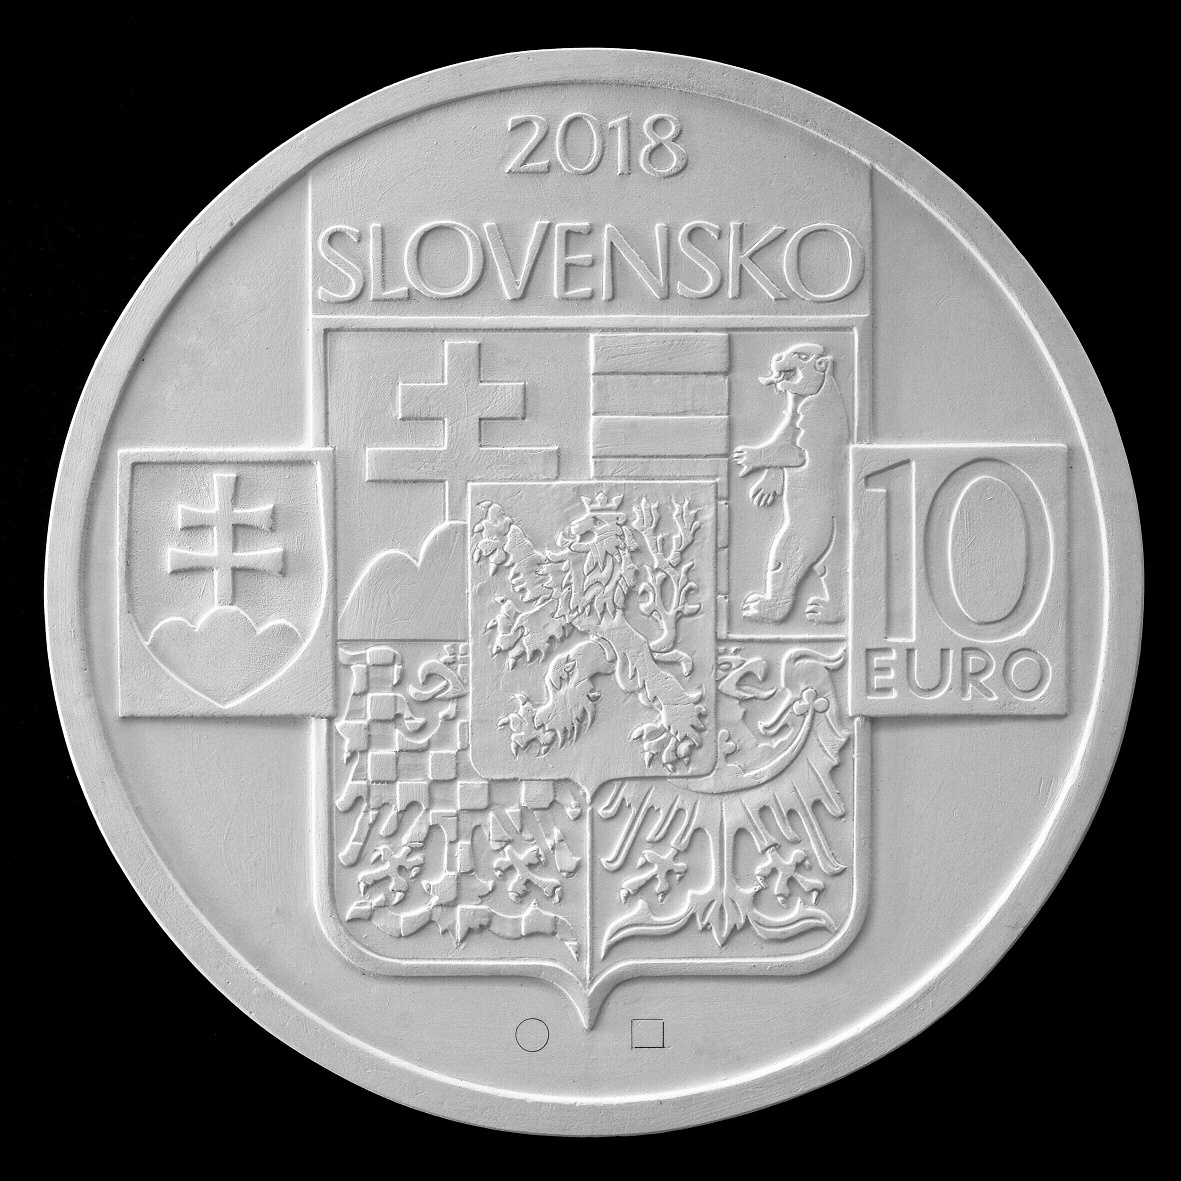 Second prize and the design selected for the coin